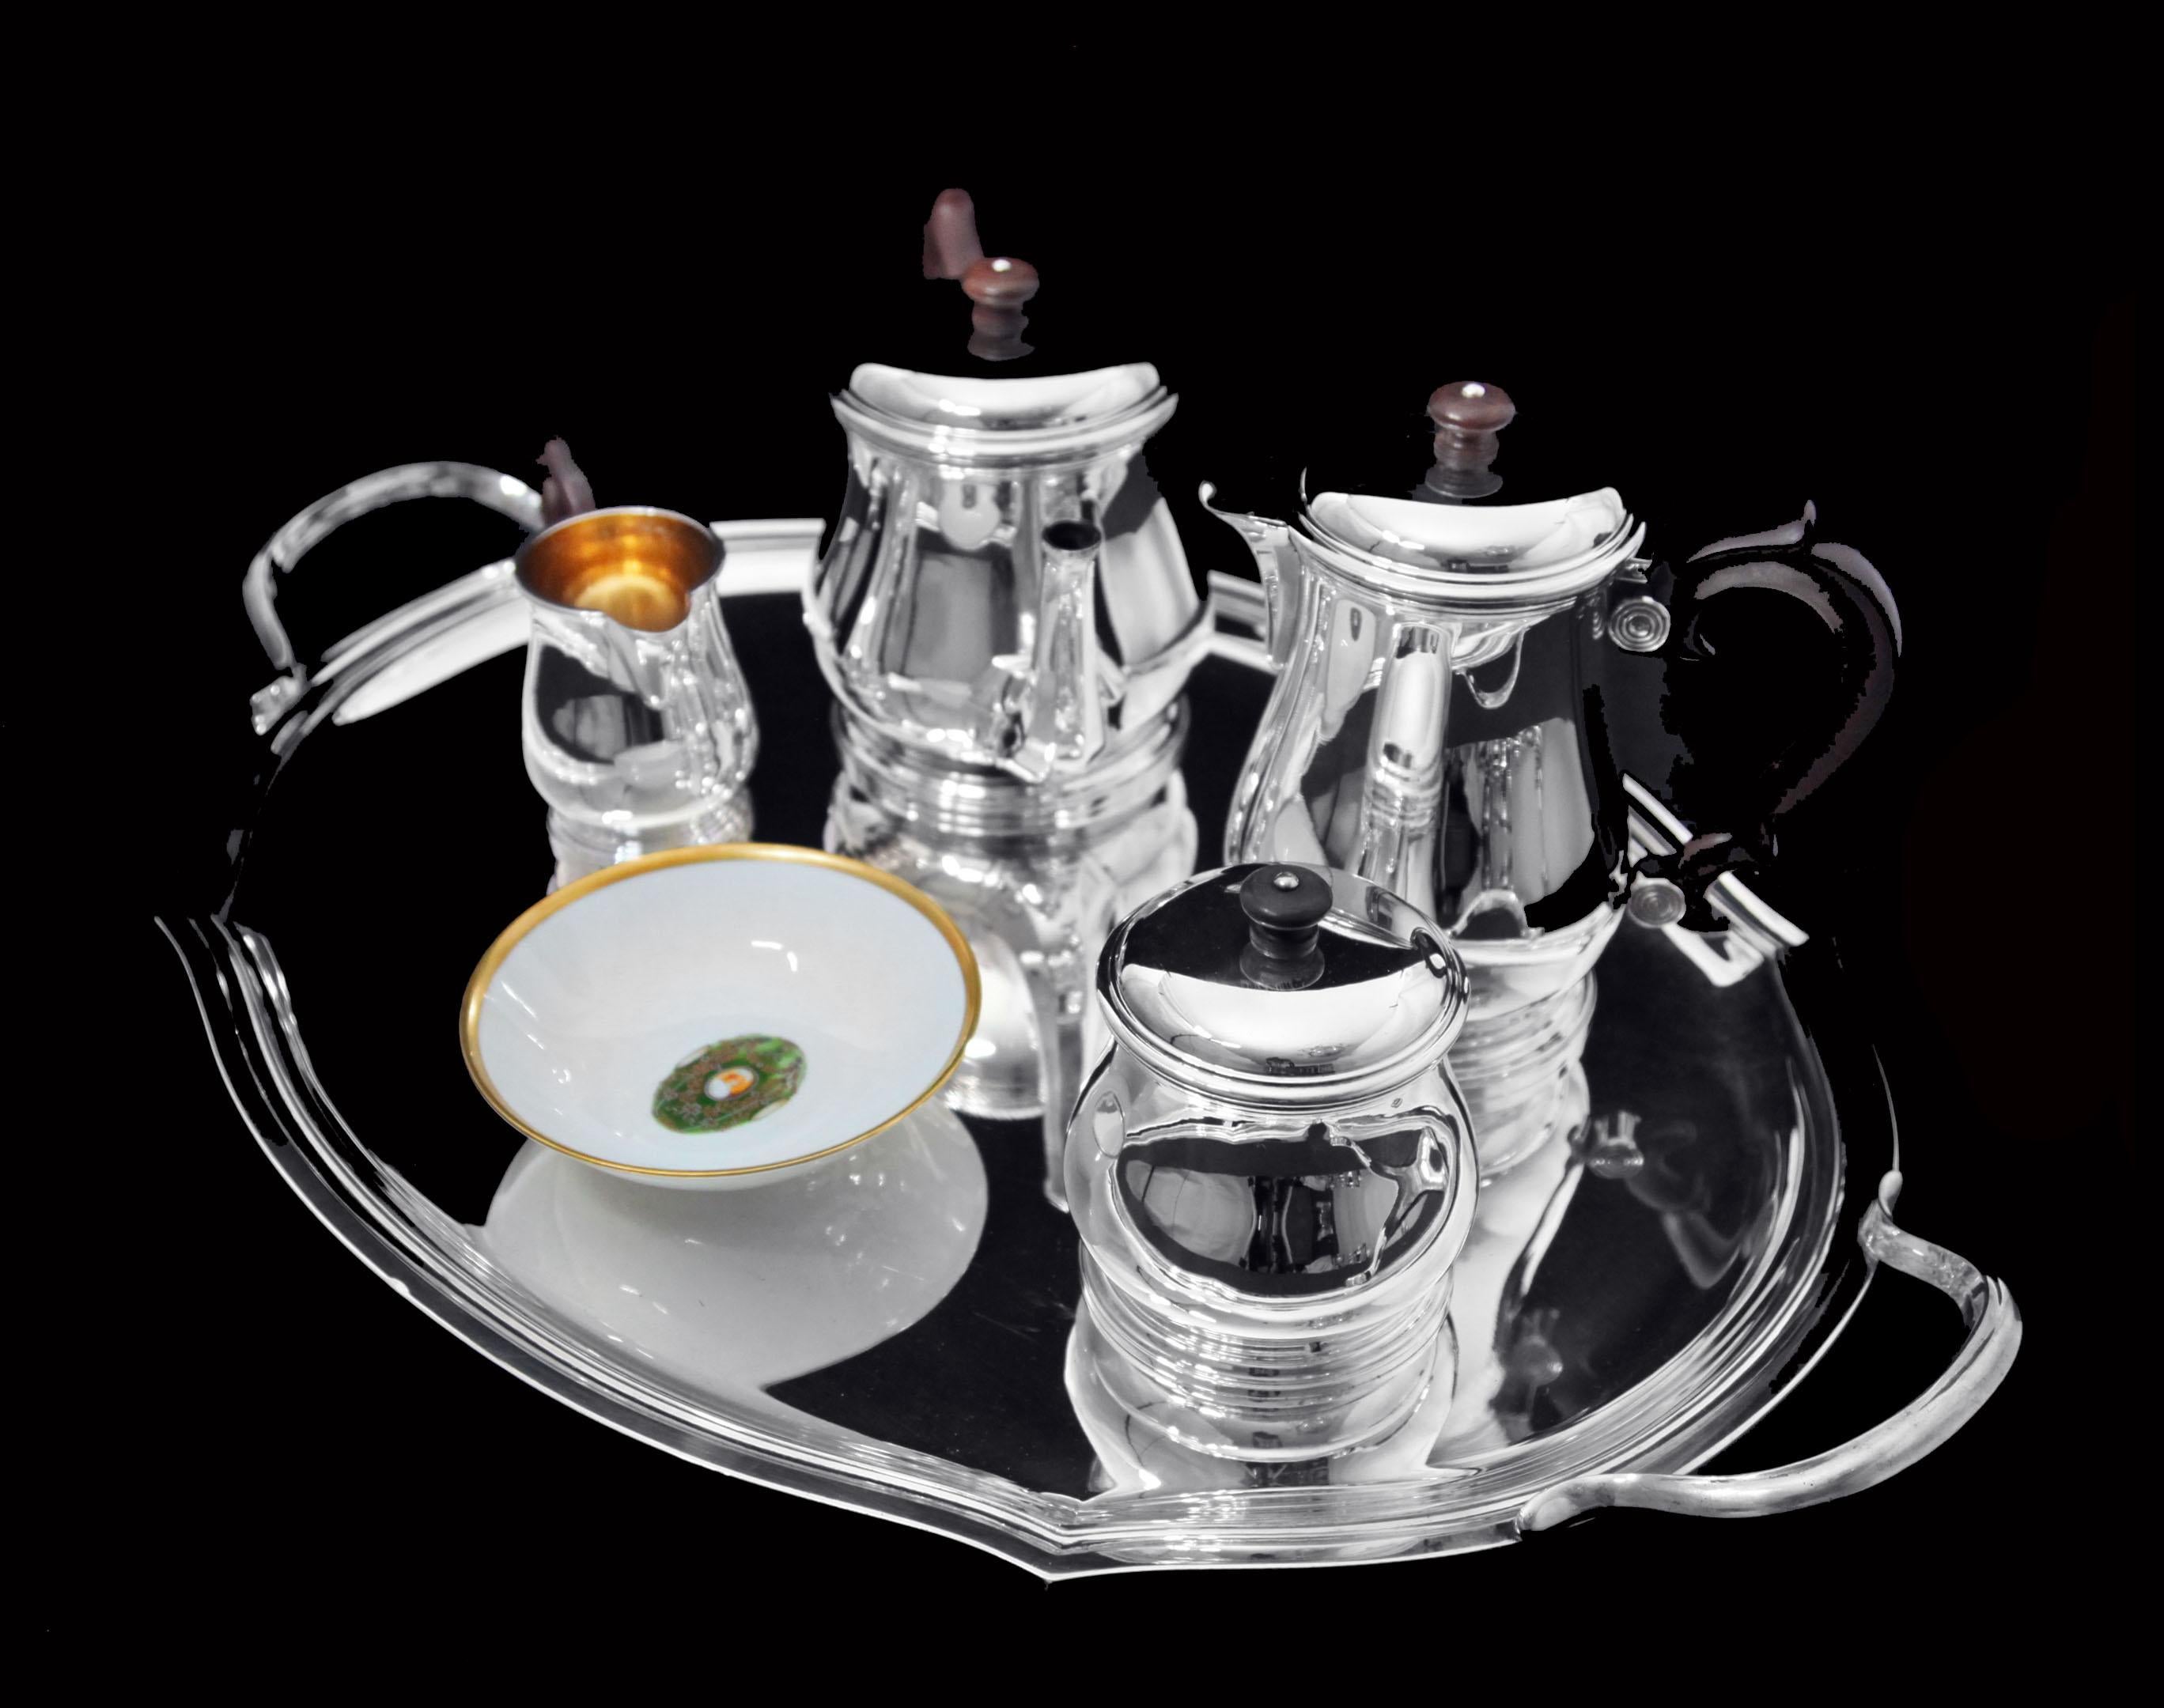 Direct from Paris, a Stunning 5pc. Antique French 950 Sterling Silver Tea Set by the World's Premier French Silversmiths 